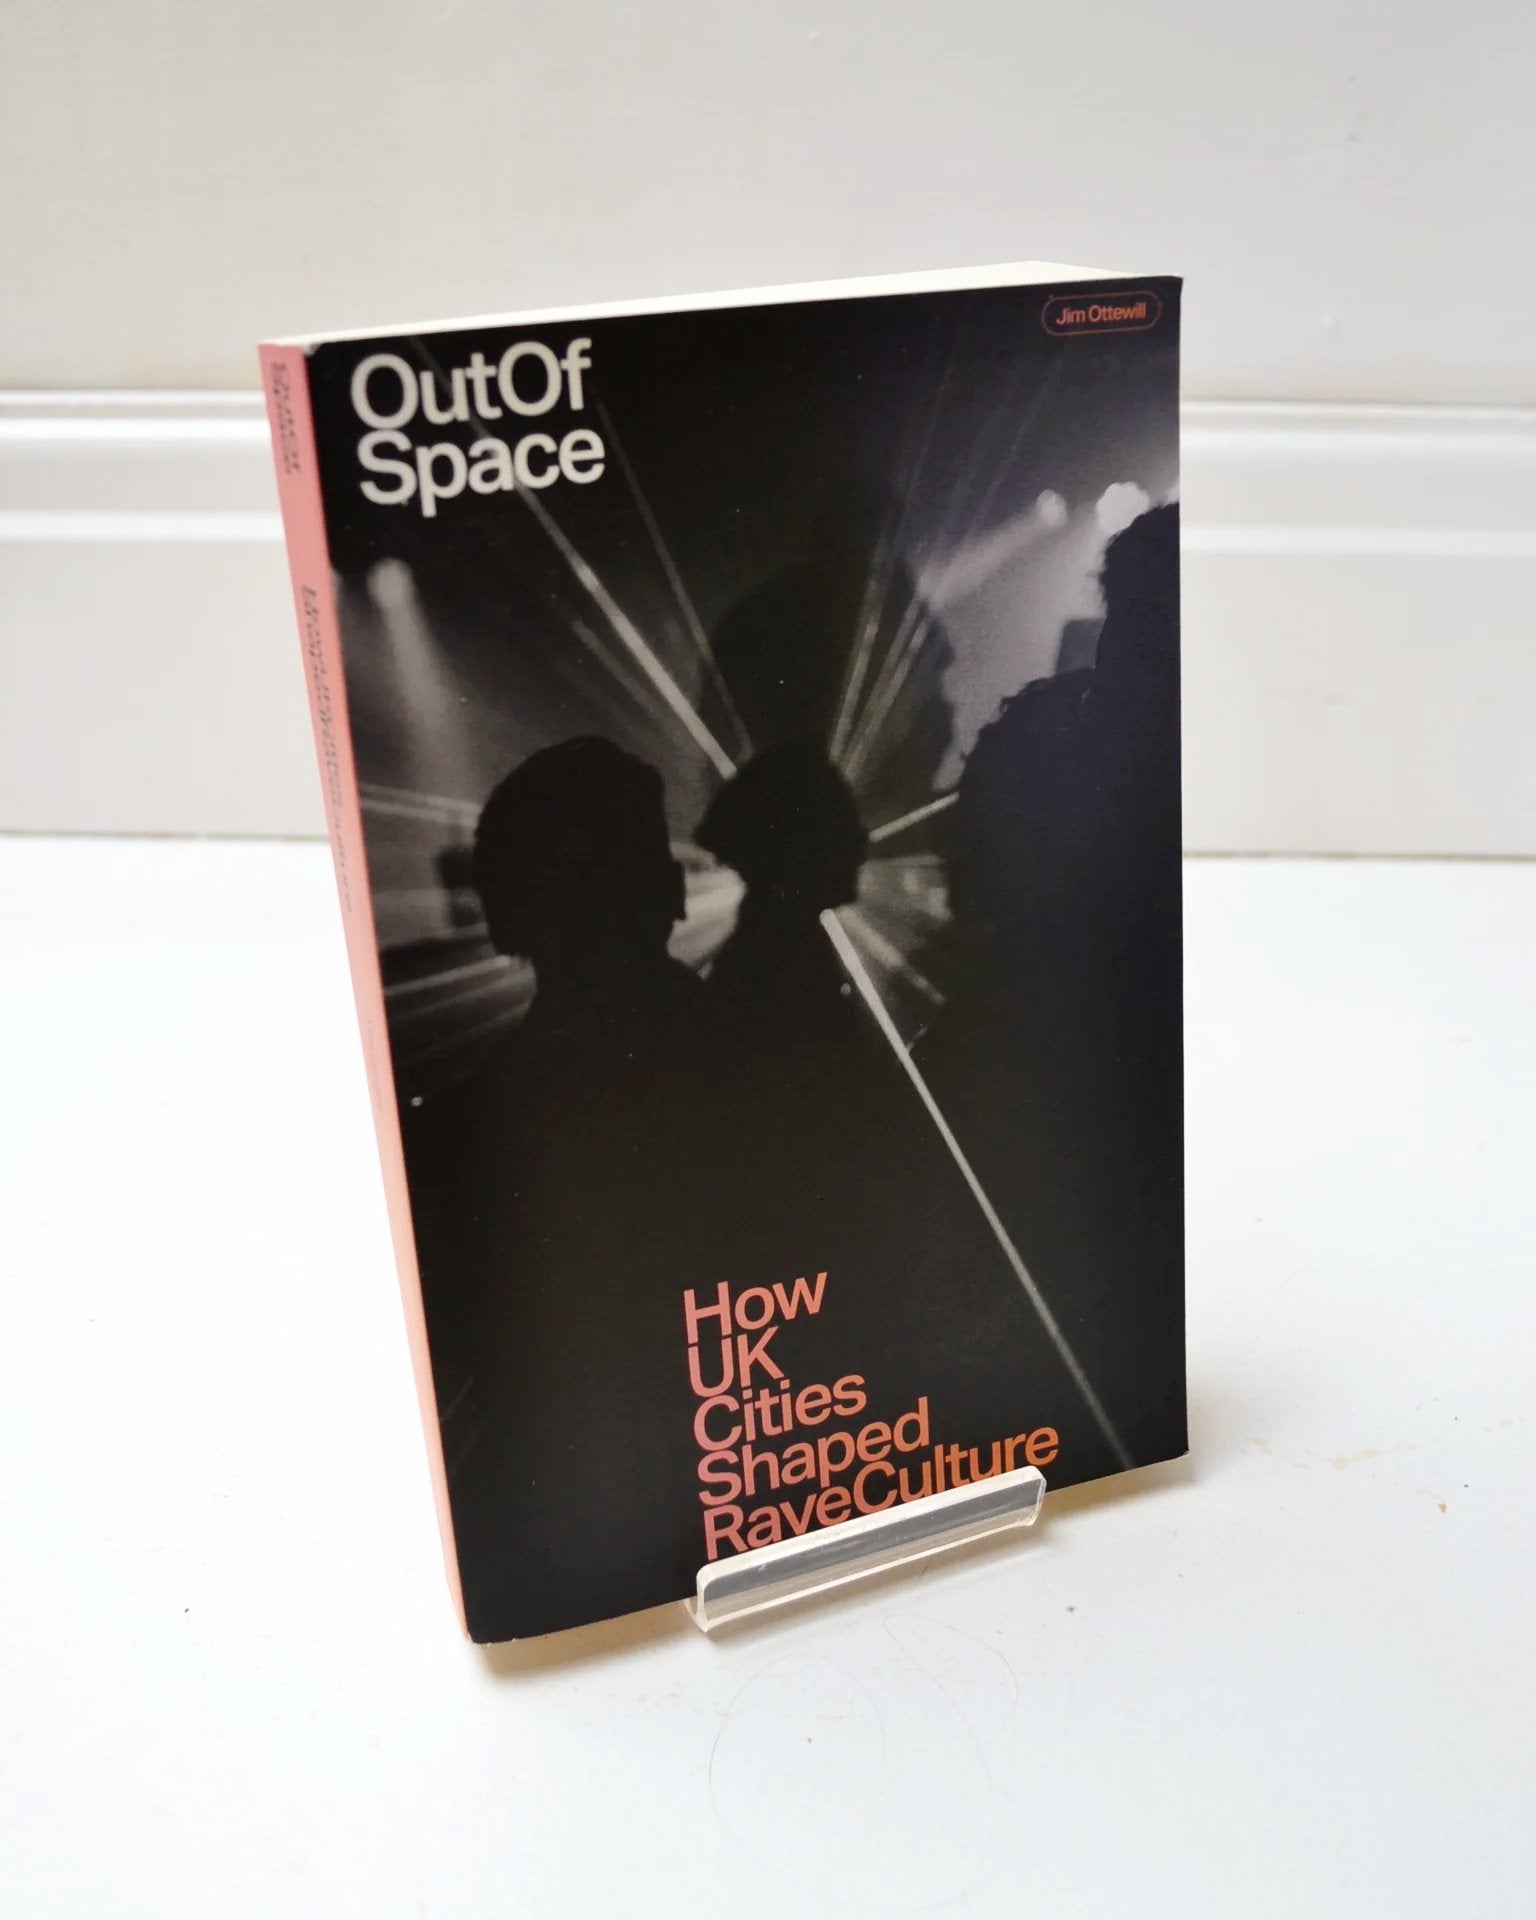 Out of Space: How UK Cities Shaped Rave Culture by Jim Ottewill (Velocity Press / 2022)